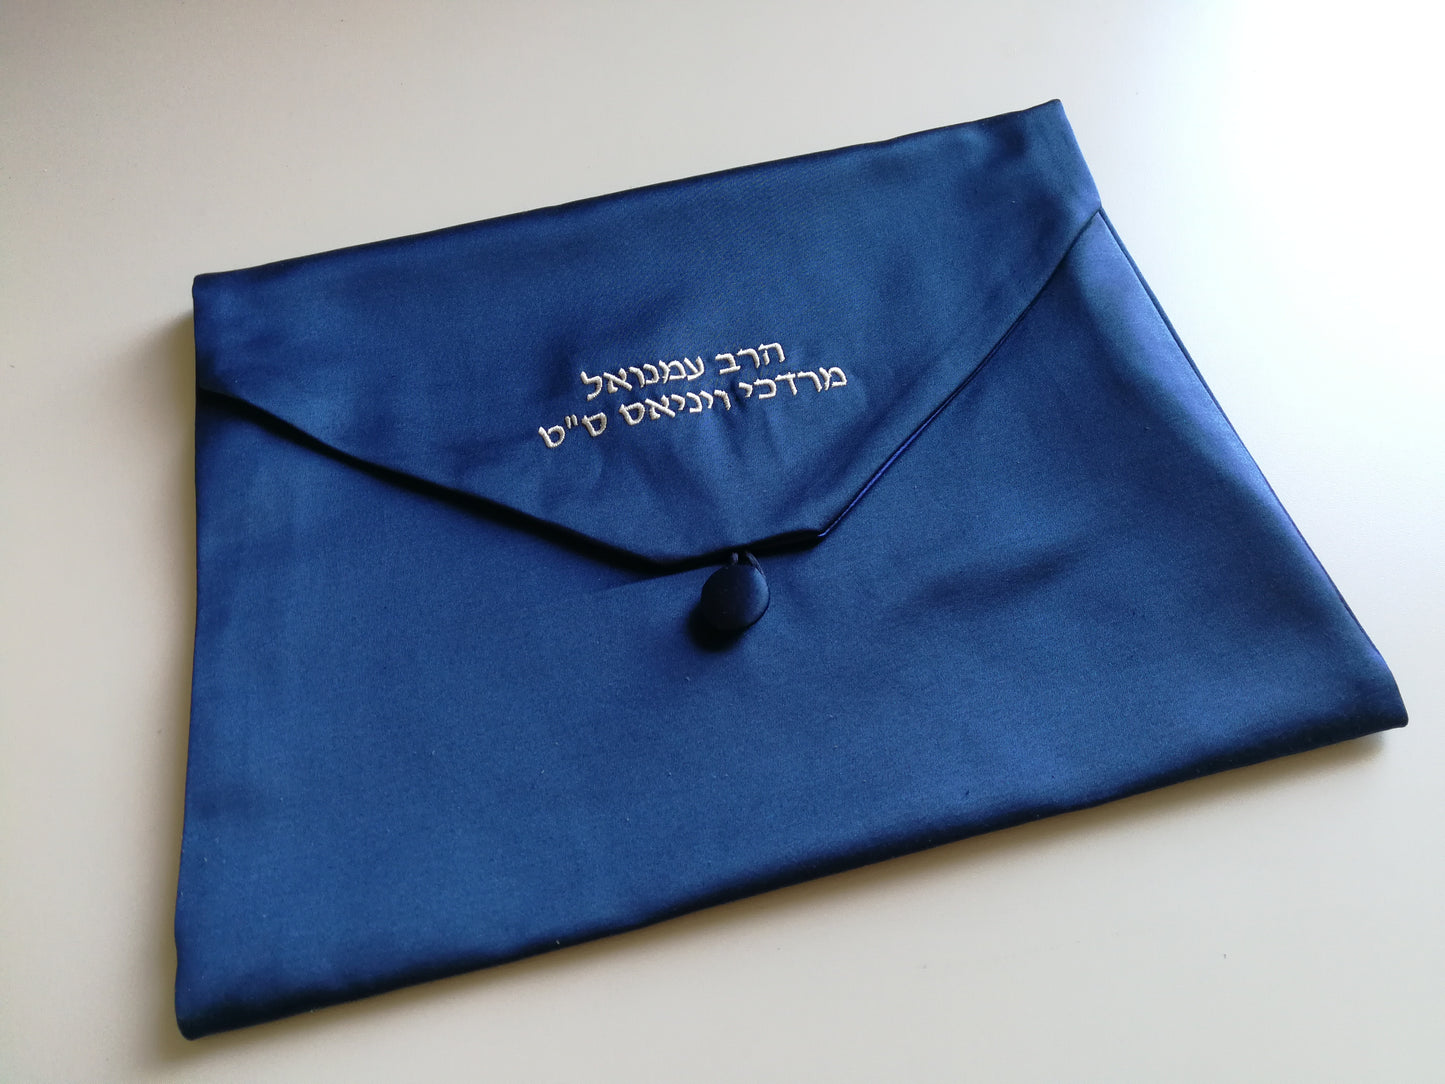 Tallit bag made out of limited edition textiles